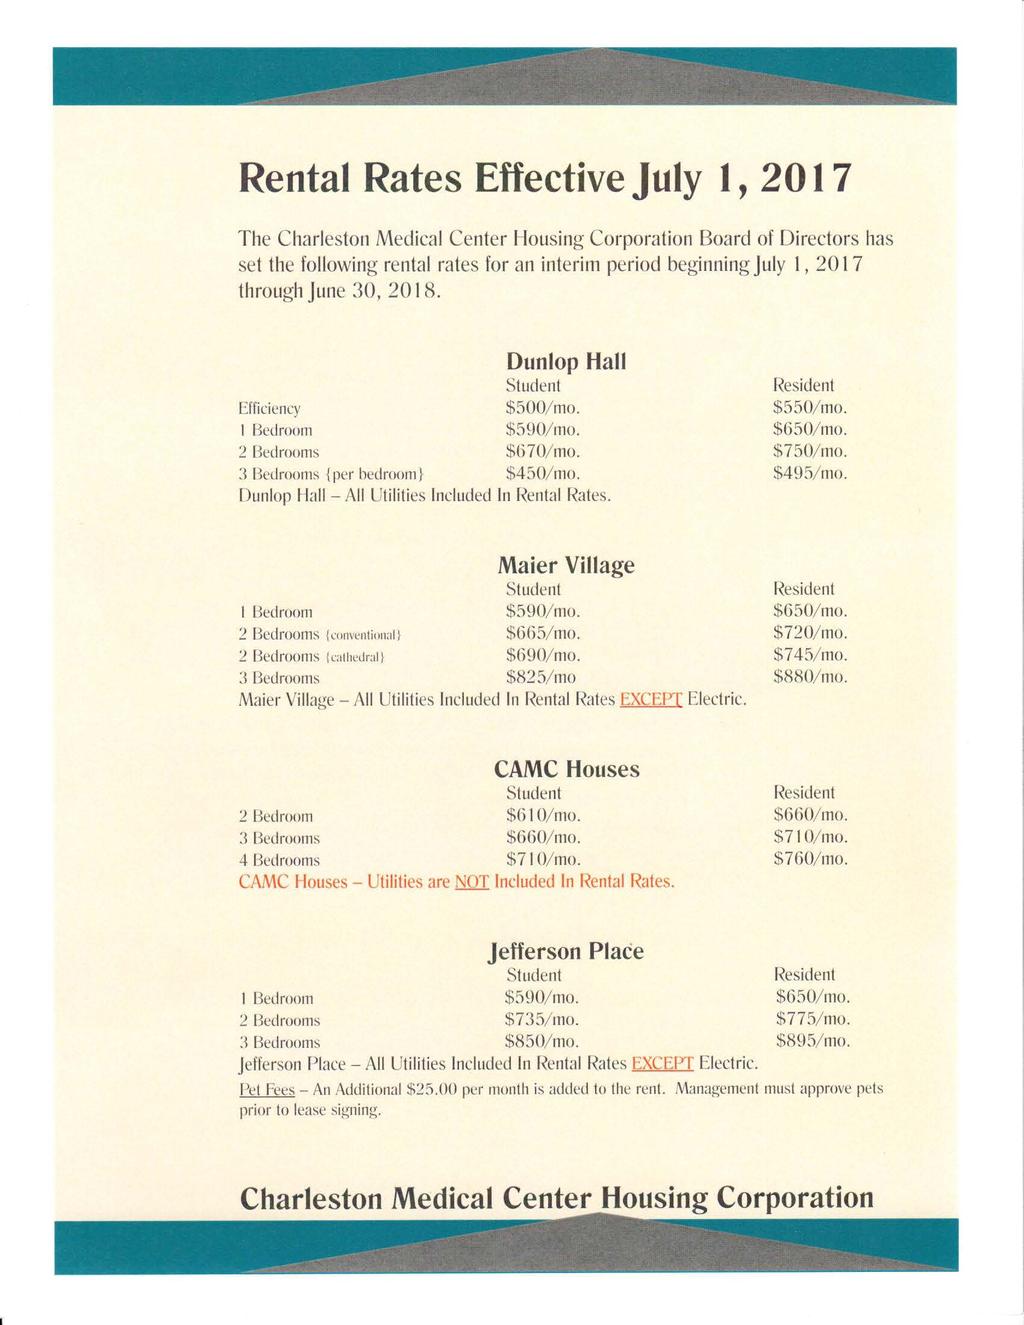 Rental Rates Effective July 1, 201 7 The Board of Directors has set the following rental rates for an interim period beginning July I, 20 I 7 through June 30, 20 18.